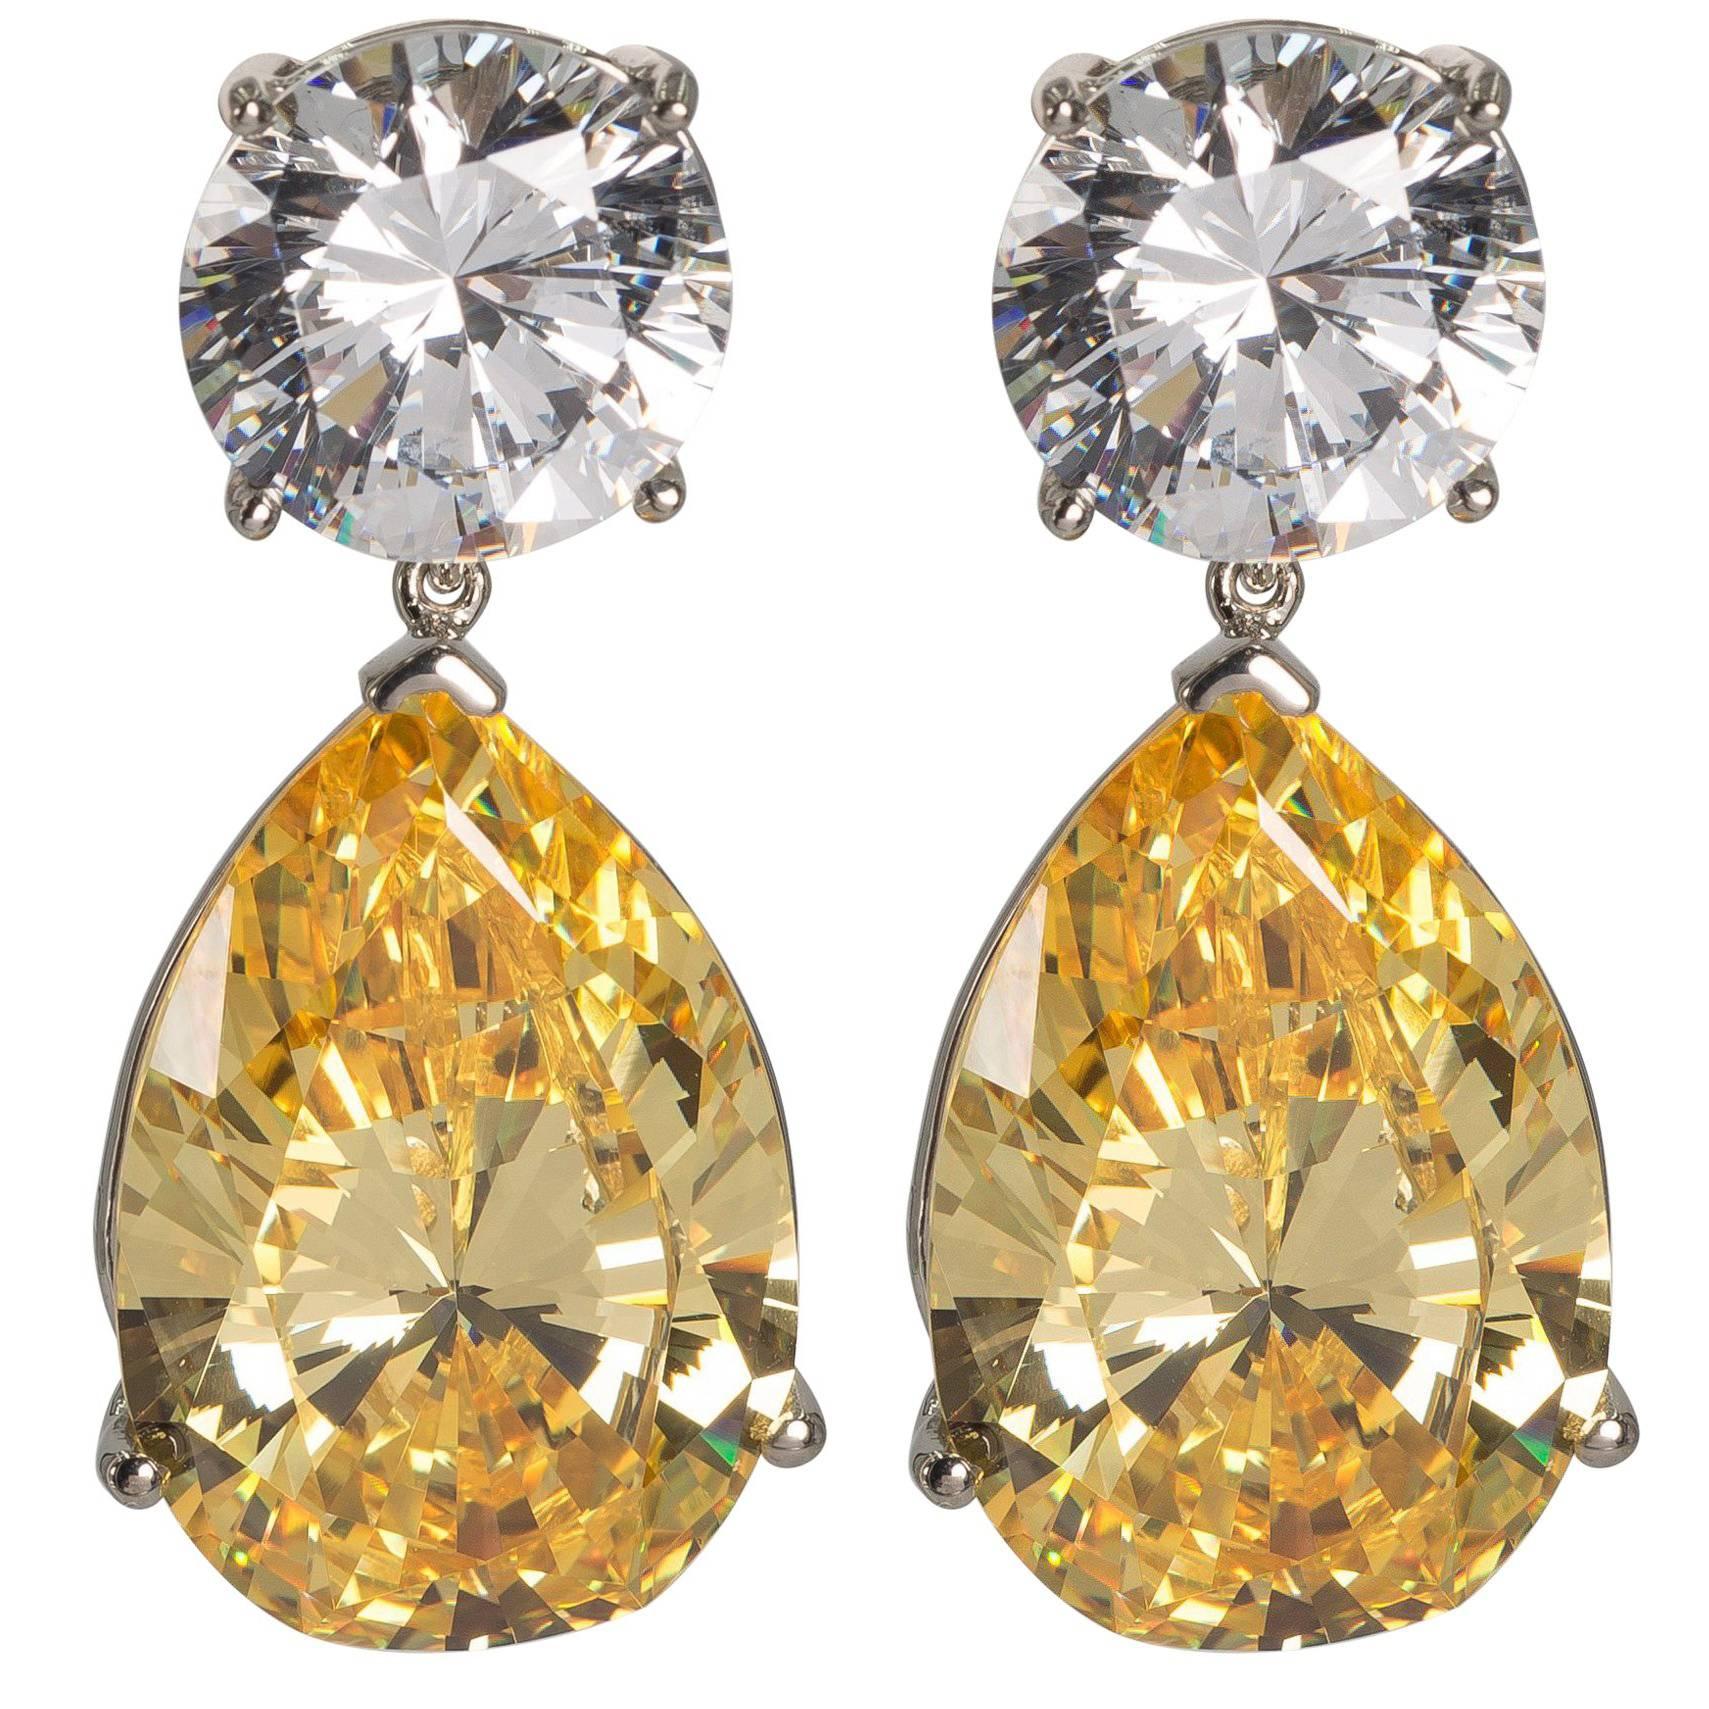  Large  Created Diamond Look White and Yellow Drop CZ Earrings by Clive Kandel For Sale